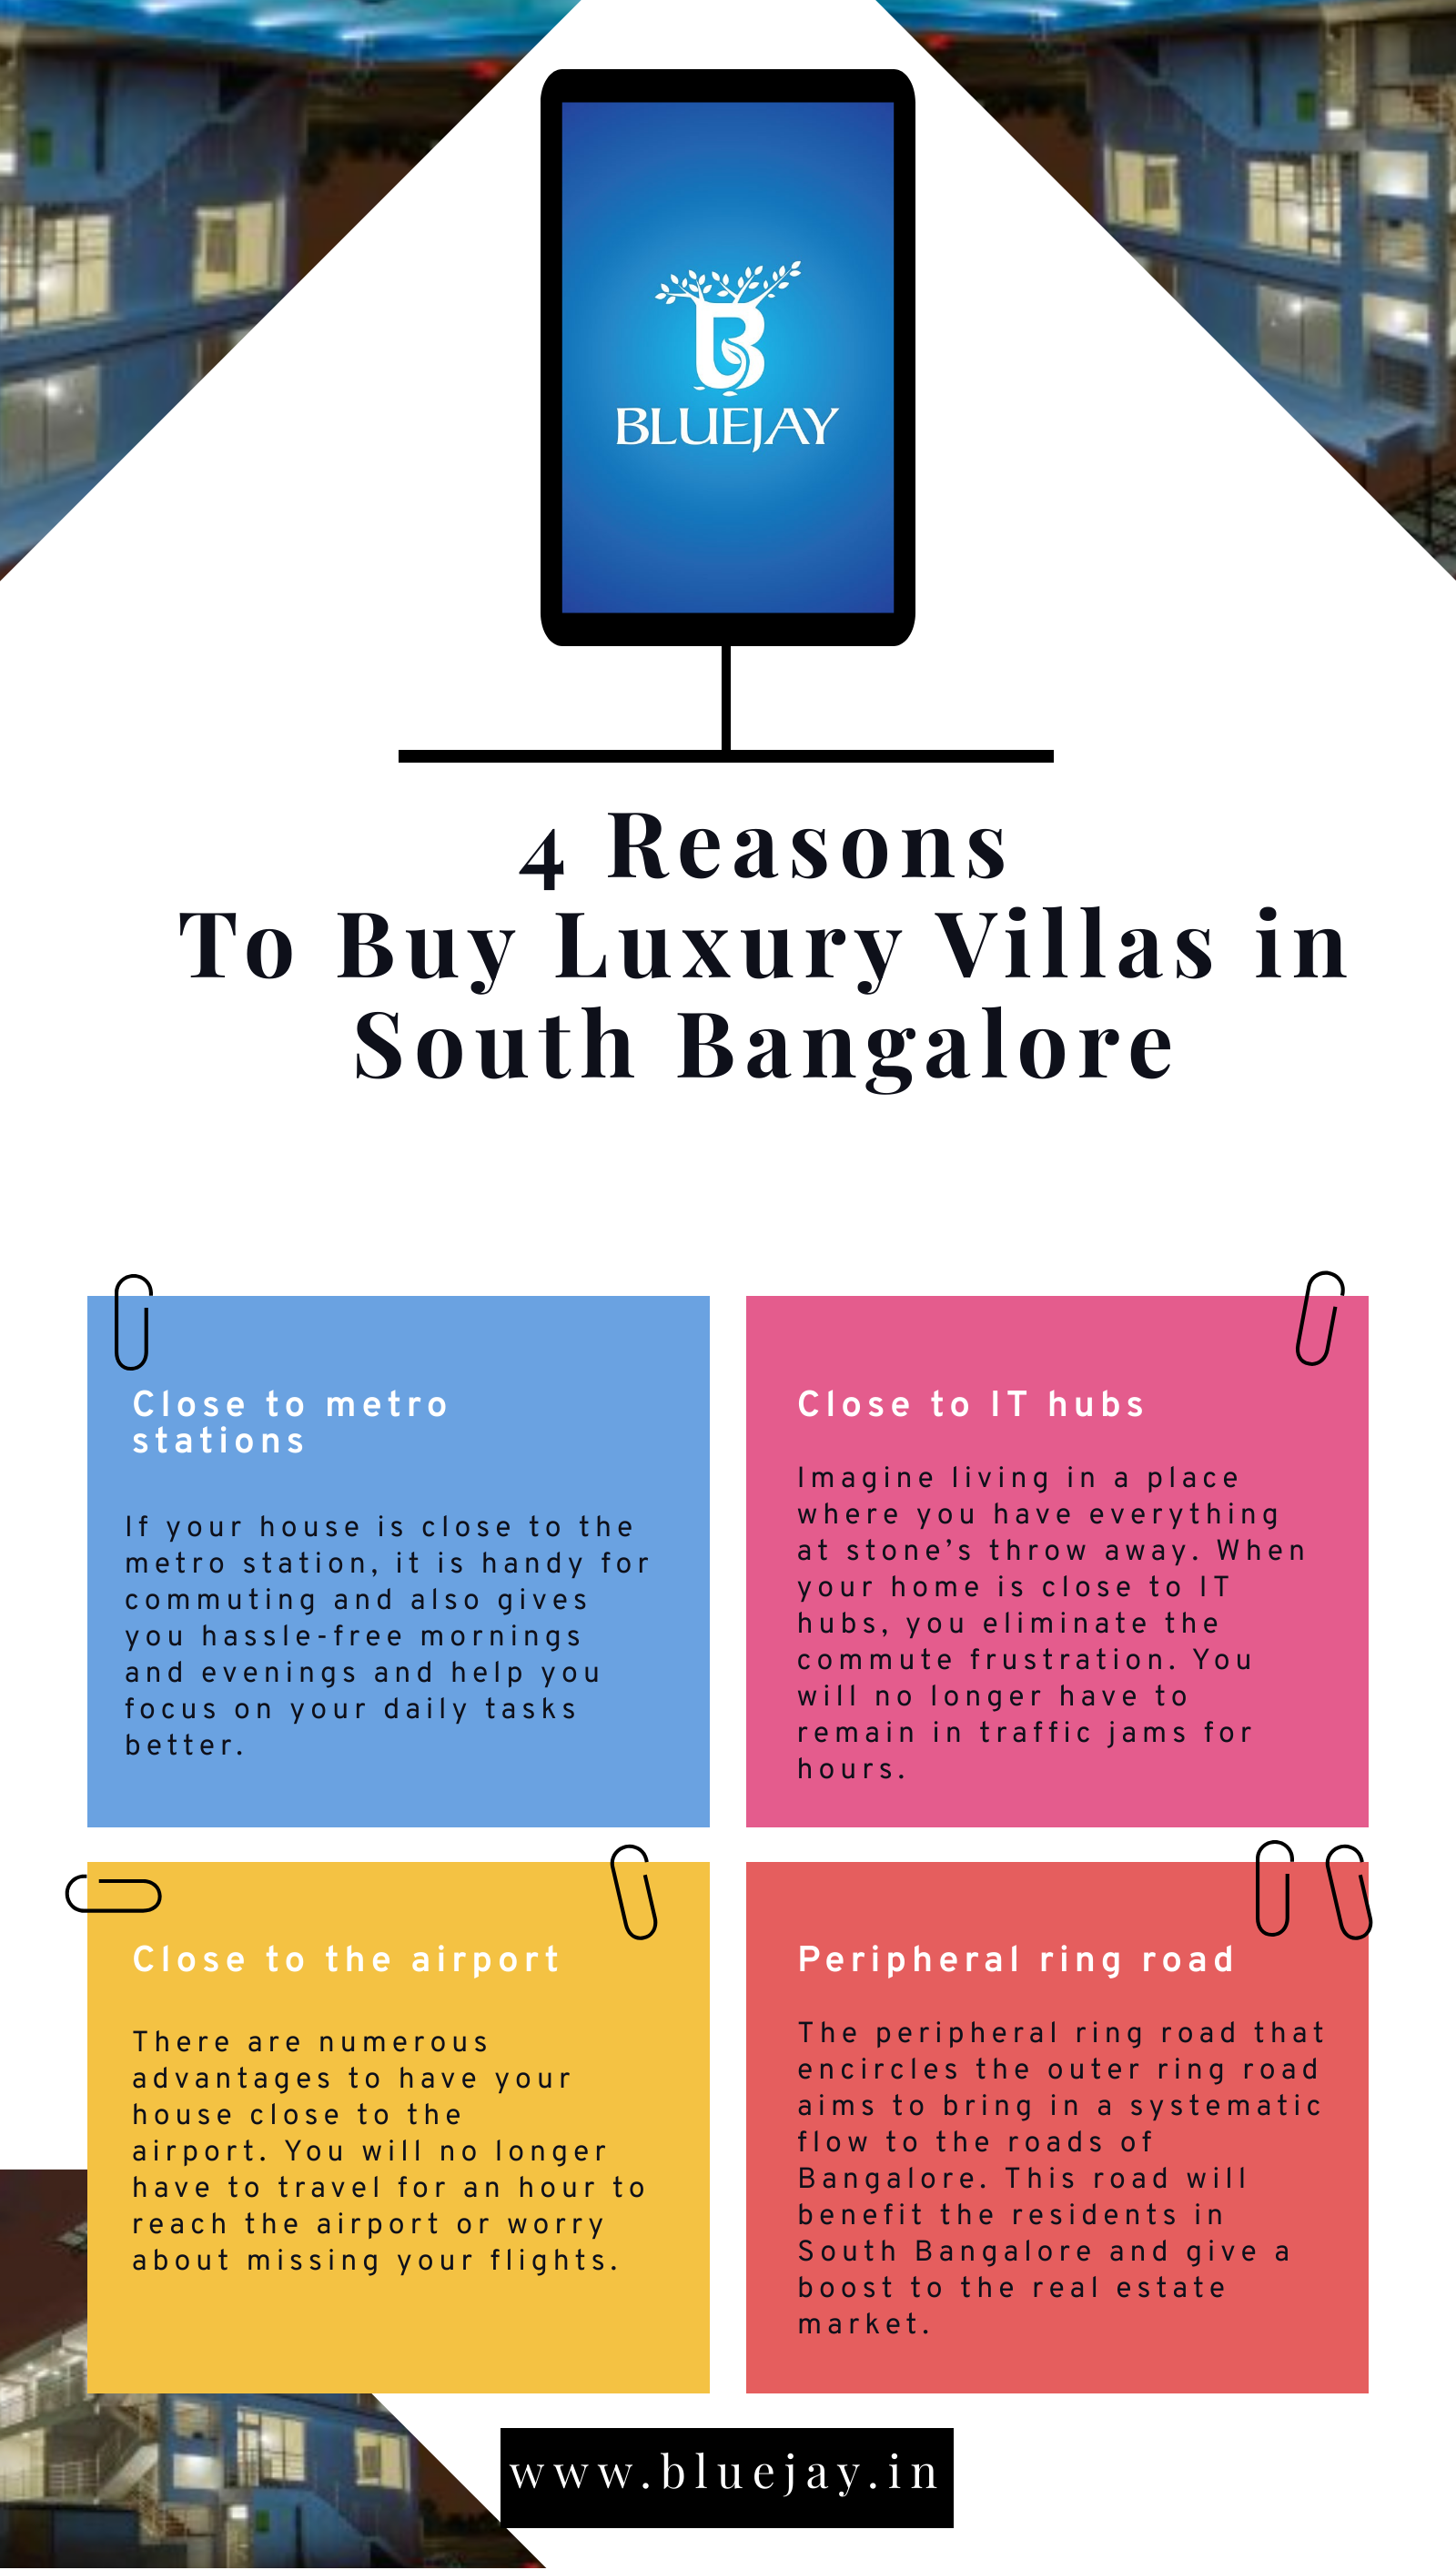 Why is Bangalore the best place to invest in residential luxury villas